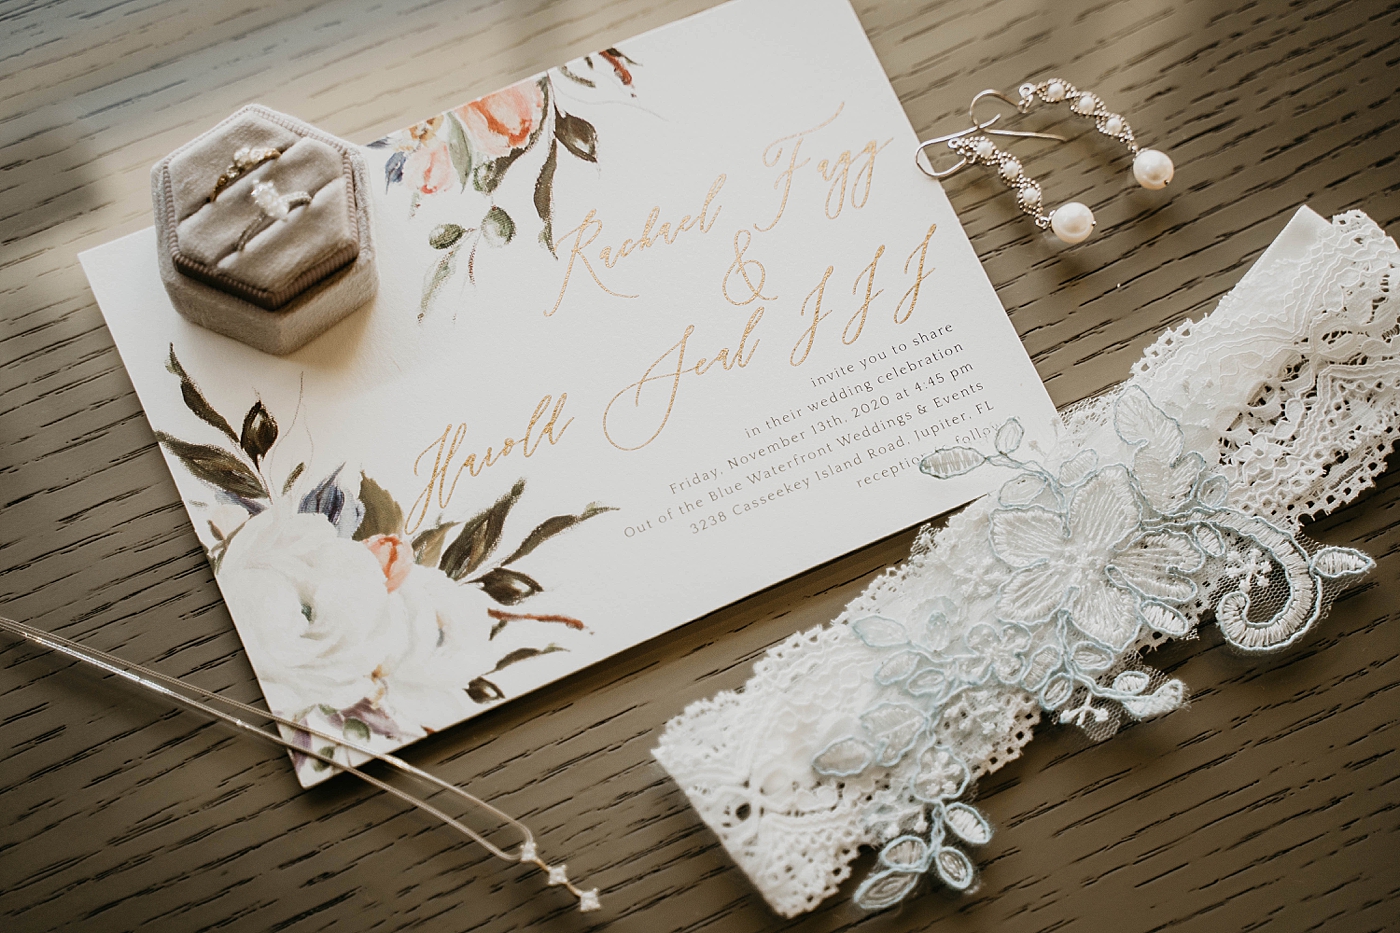 Detail shot of Wedding bands invitations and garter Out of the Blue Celebrations Wedding Photography captured by South Florida Wedding Photographer Krystal Capone Photography 